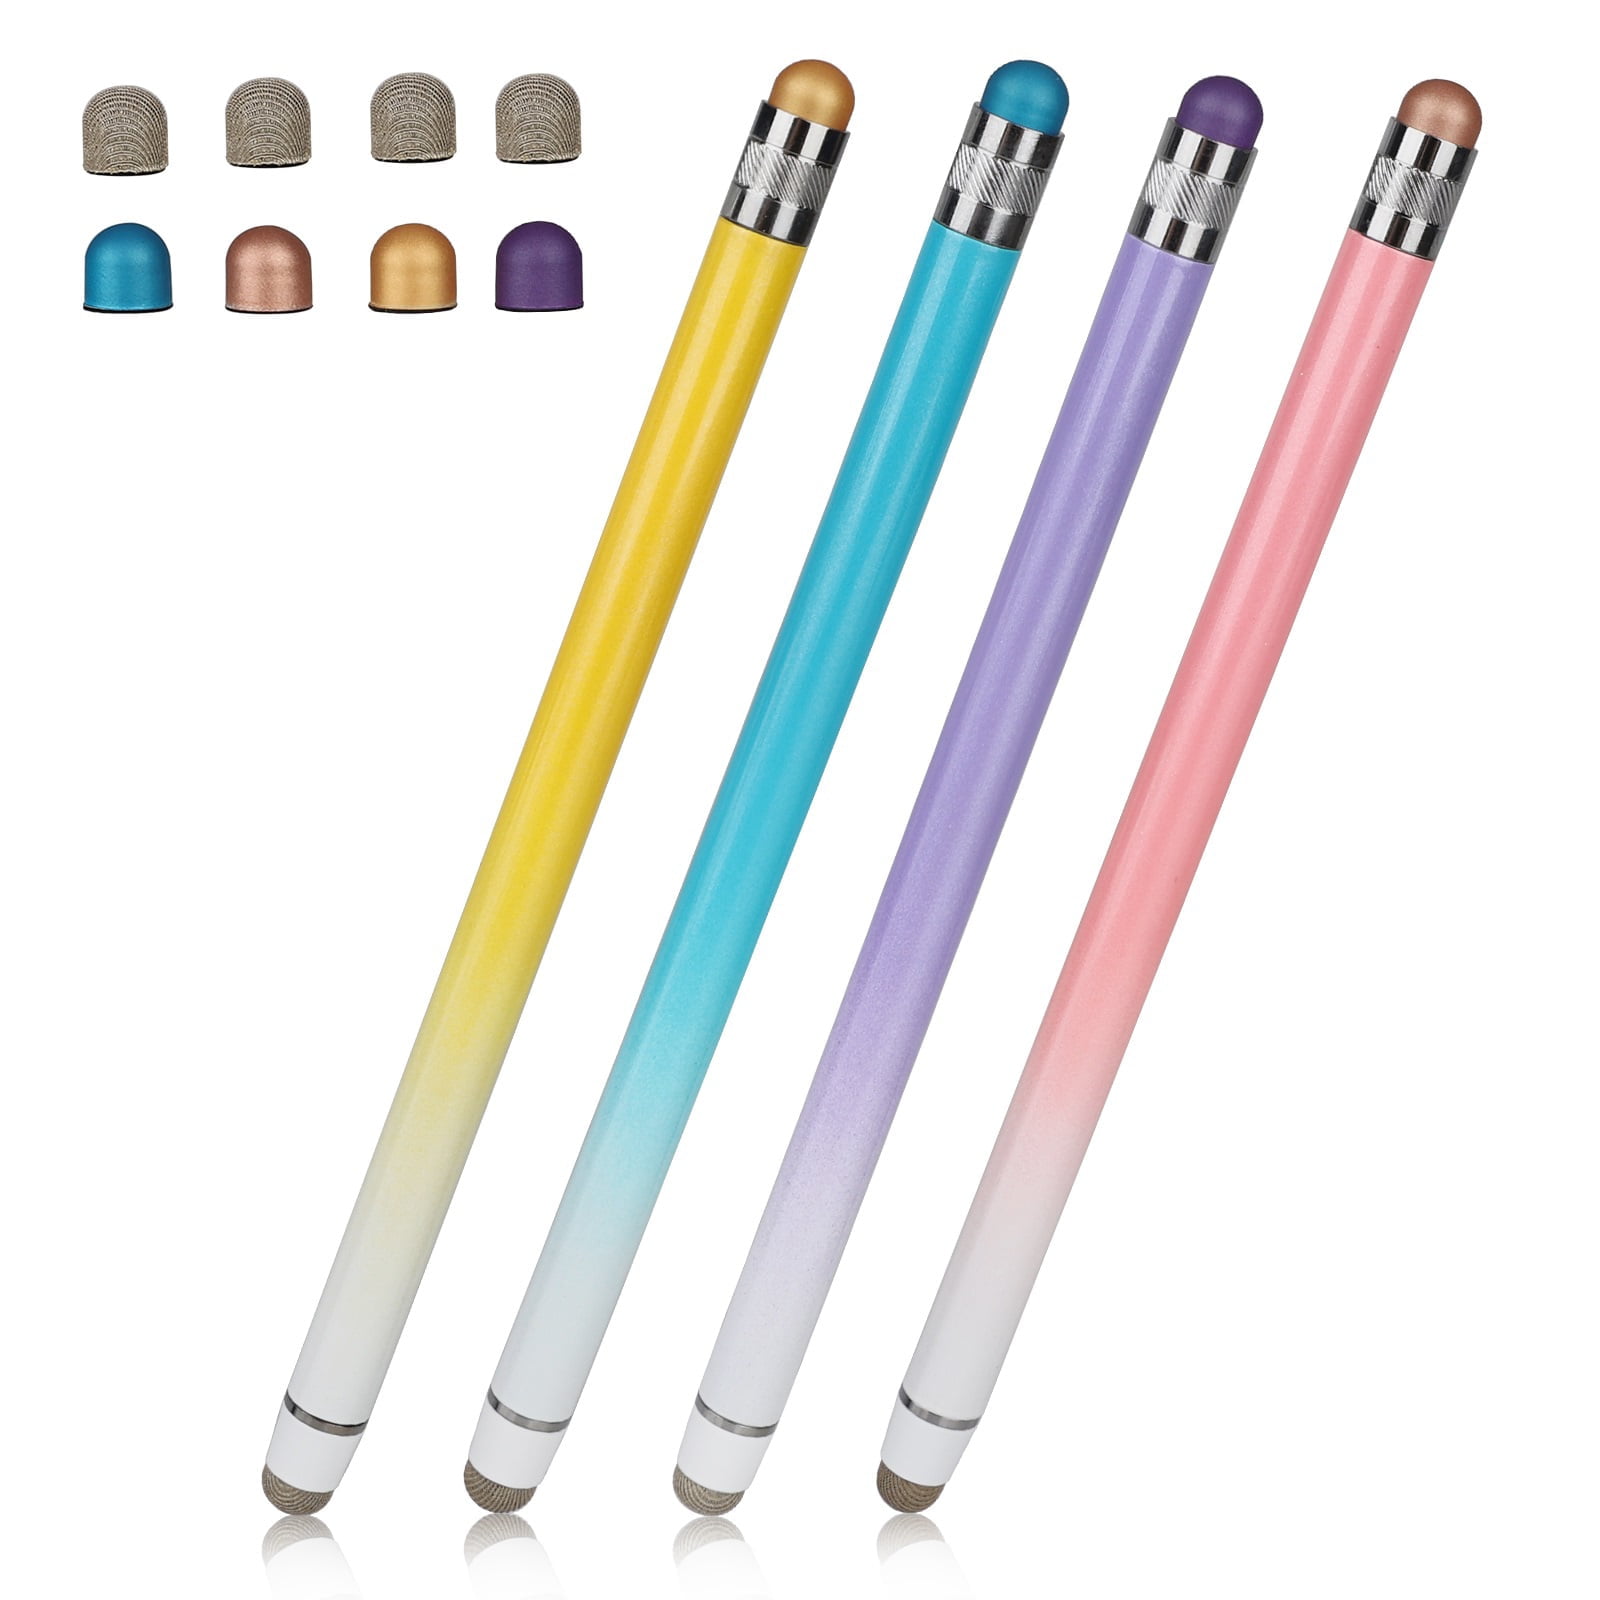 Metapen iPad Stylus Pen, Faster Charge Apple Pens with Tilt Functionality  for iPad 10/9/8/7/6th Gen, Smooth Drawing 